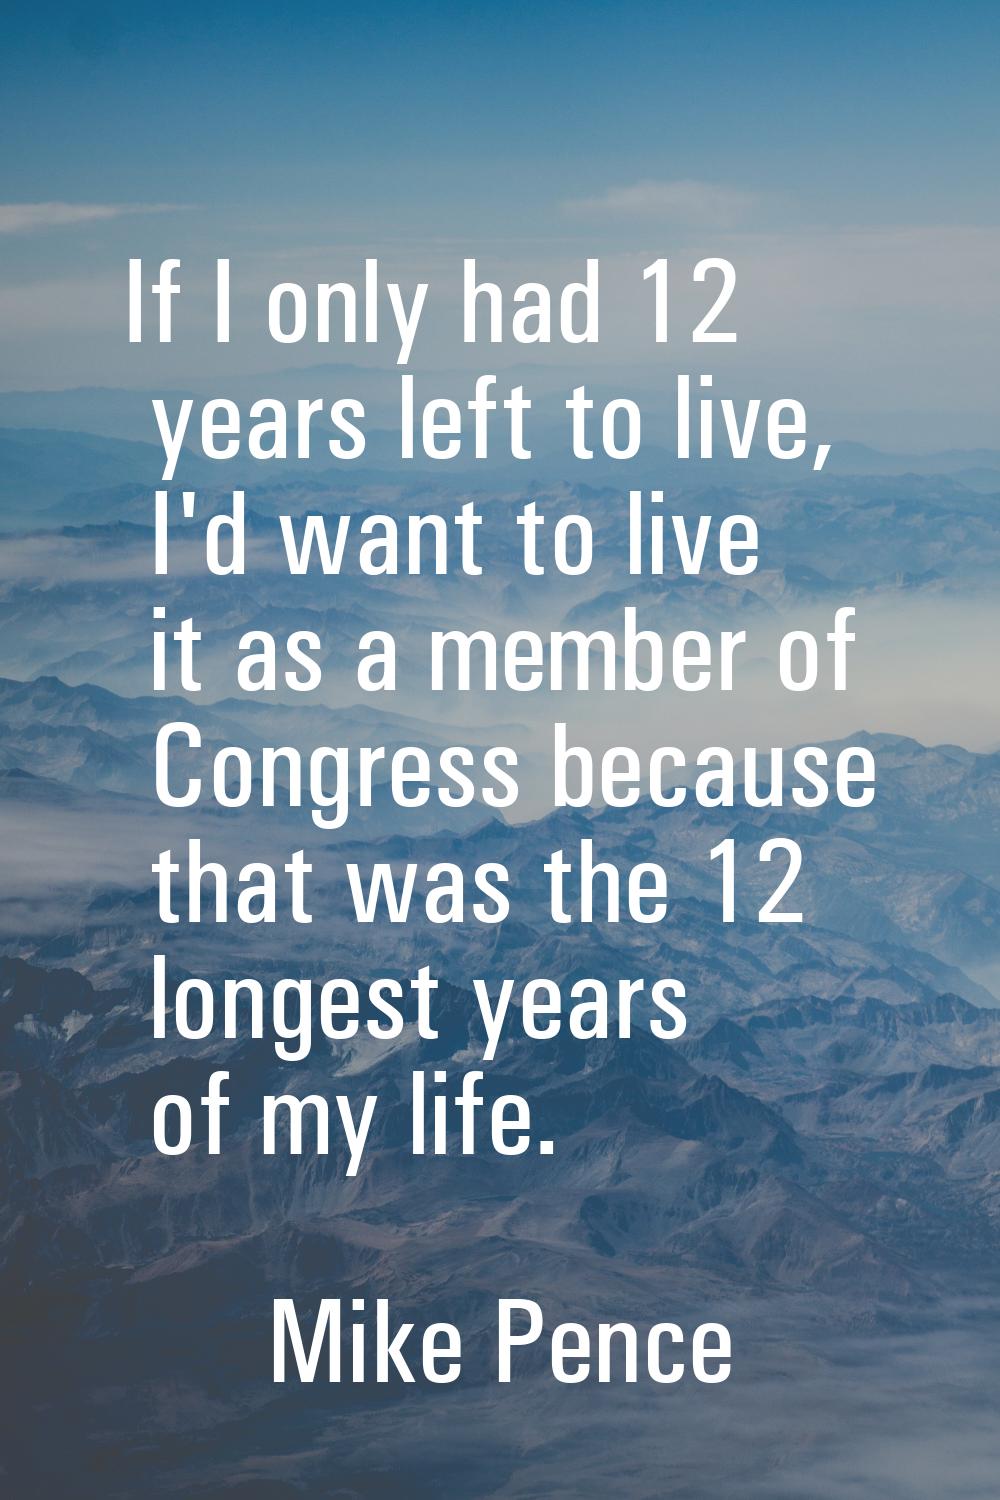 If I only had 12 years left to live, I'd want to live it as a member of Congress because that was t